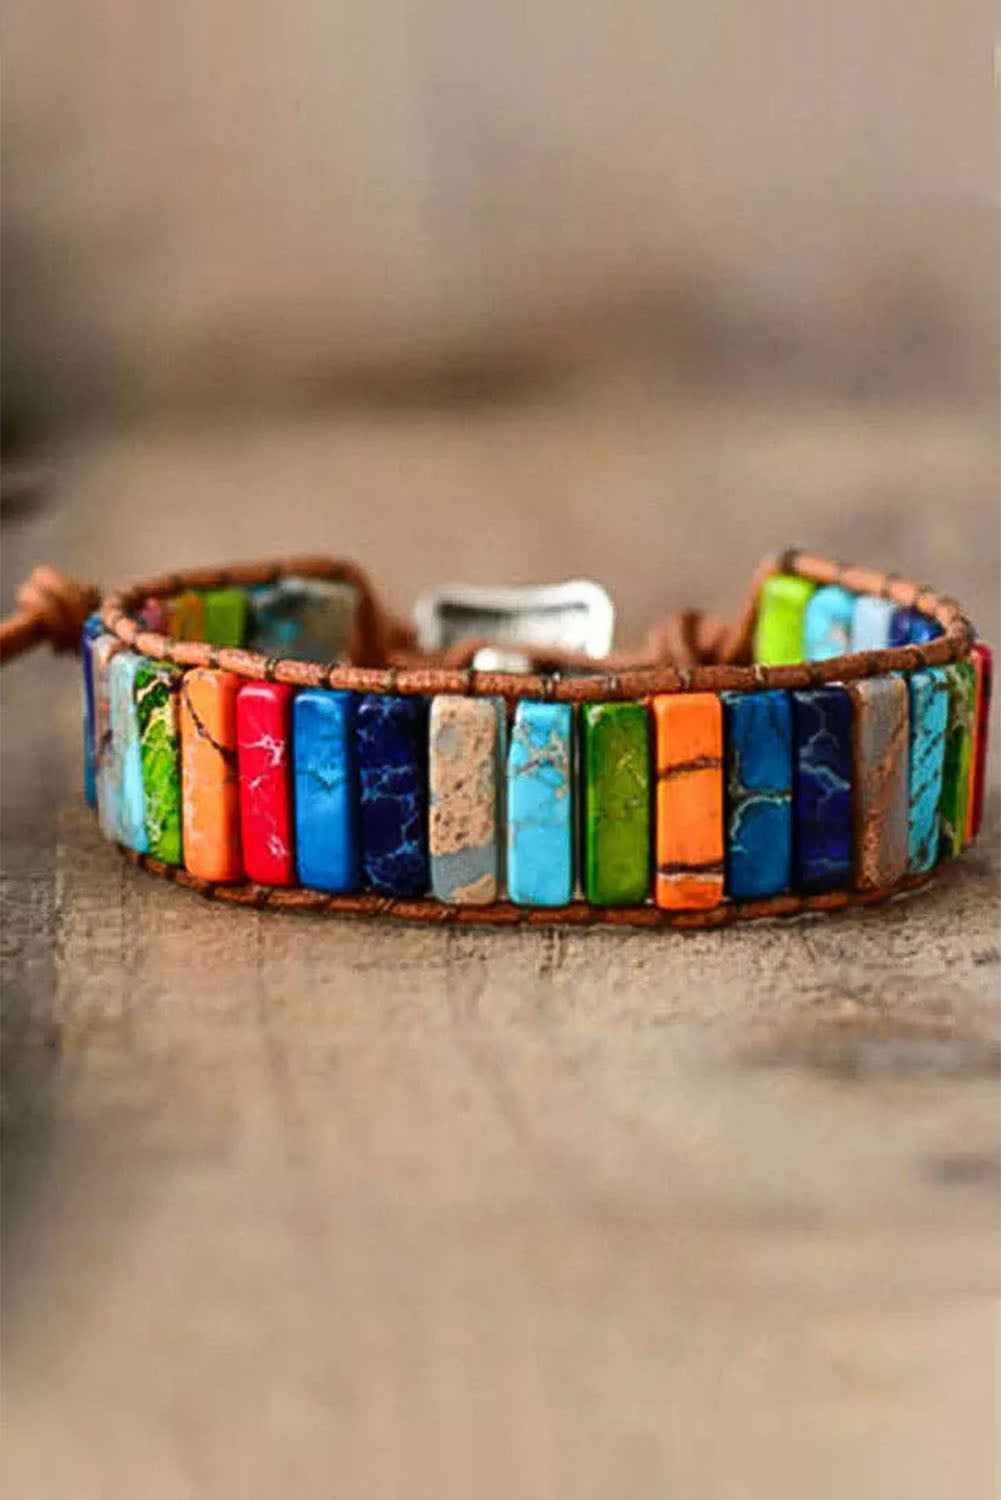 BH01778-22, Multicolor Rainbow Wristband LGBT Pride Bracelet Gifts Accessories for Women Men